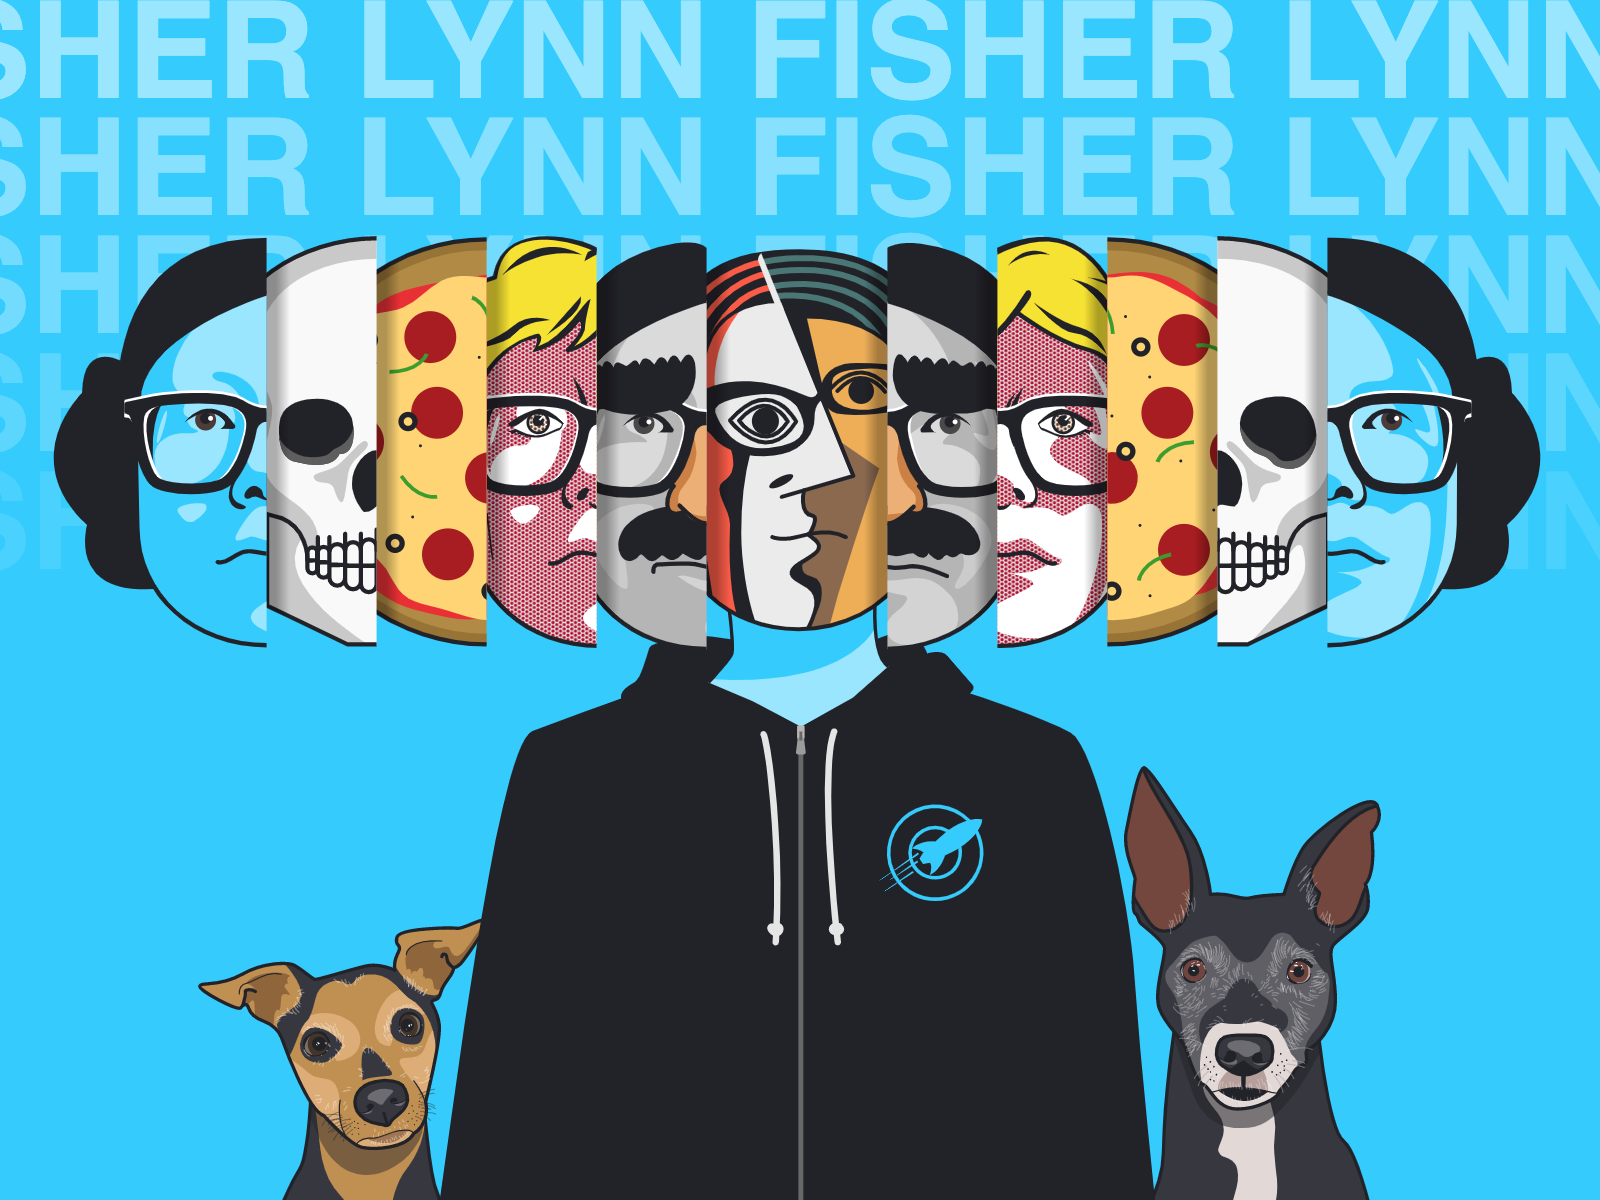 Resizing the browser window will cause the illustrations on Lynn Fisher’s 2019 portfolio redesign to crack open revealing more within them.